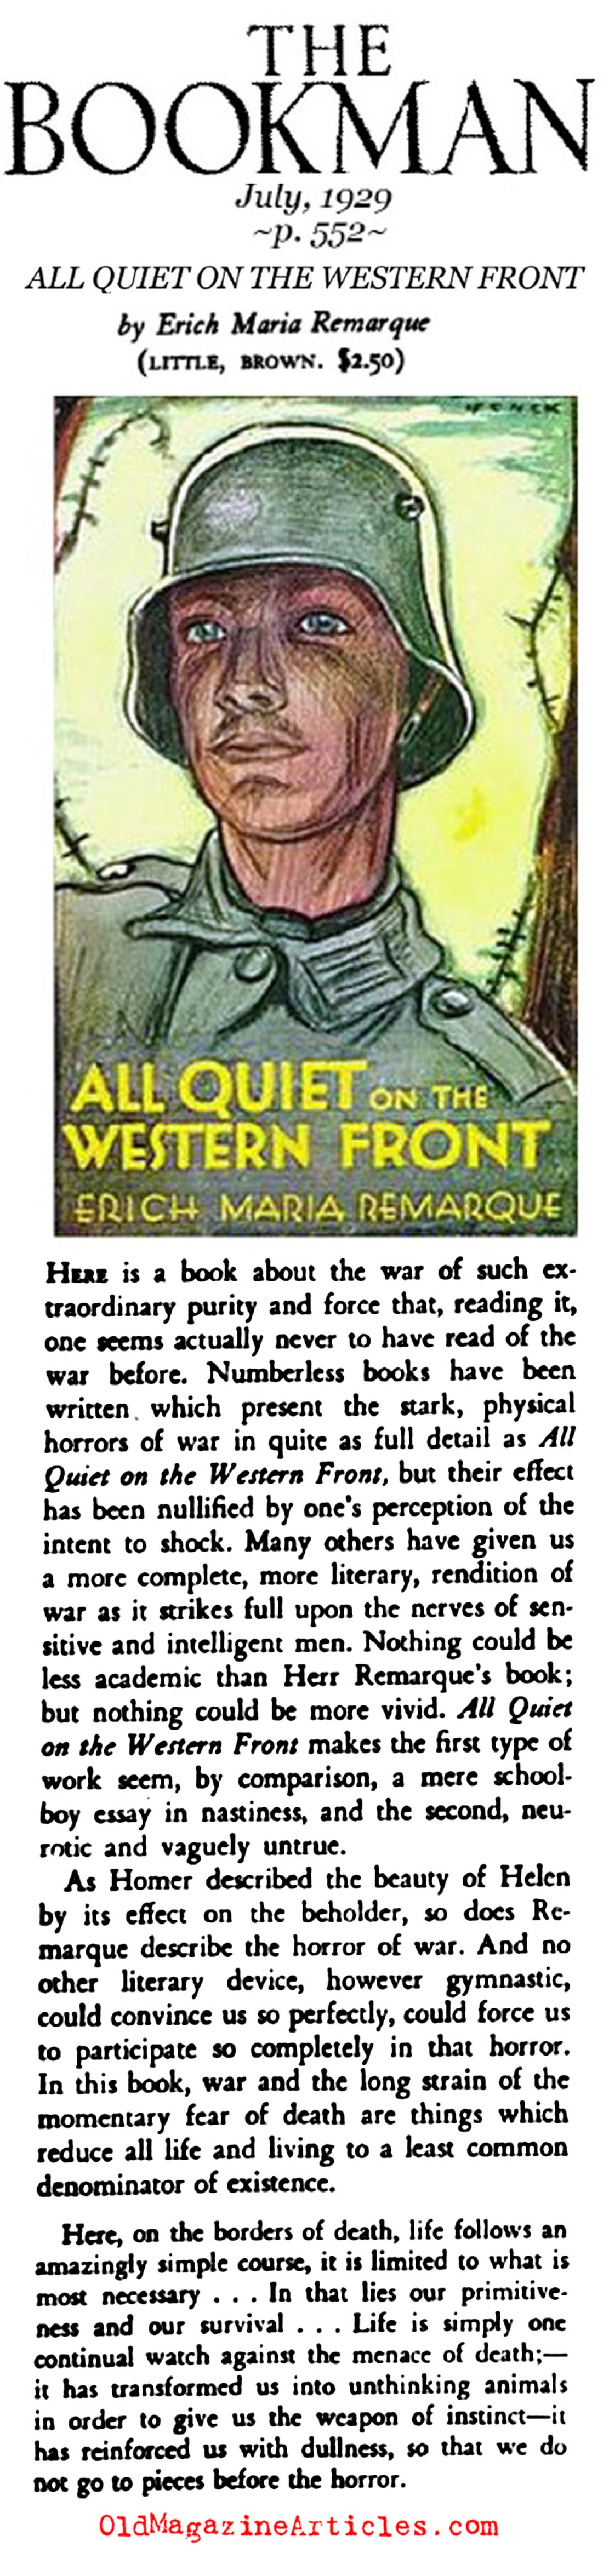 <i>ALL QUIET on the WESTERN FRONT</i> (The Bookman, 1929)